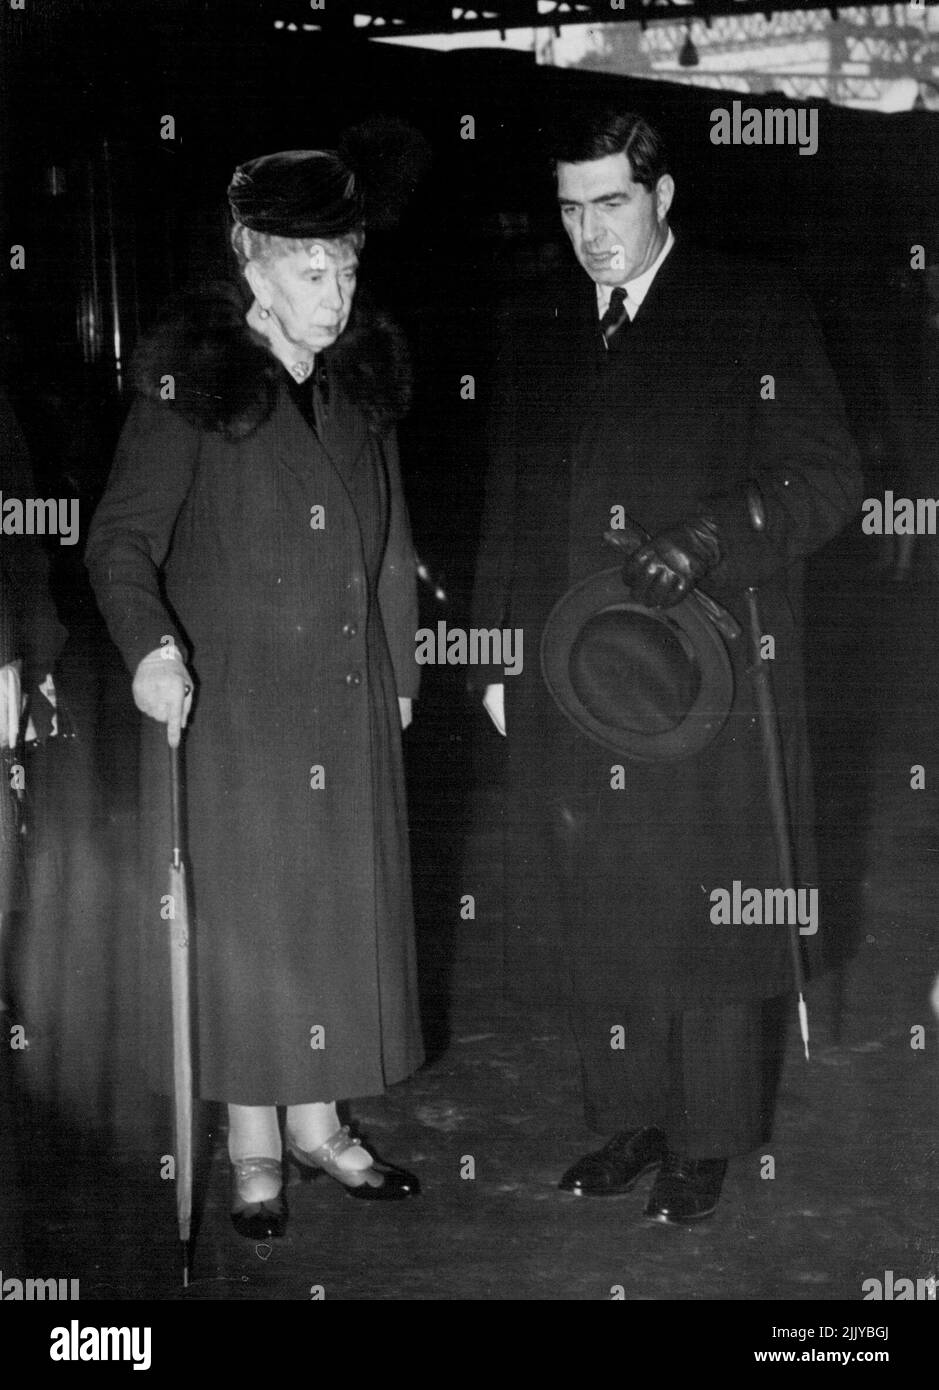 Queen Mary returned to London from Sandringham yesterday. She arrived at Liverpool Street Station by train and left immediately for Marlborough House by car. Since Queen Mary went away a month ago Marlborough House has been redecorated inside and cleaned outside. She will be joined there soon by the Princess Royal. January 15, 1952. (Photo by Daily Mail Contract Picture). Stock Photo